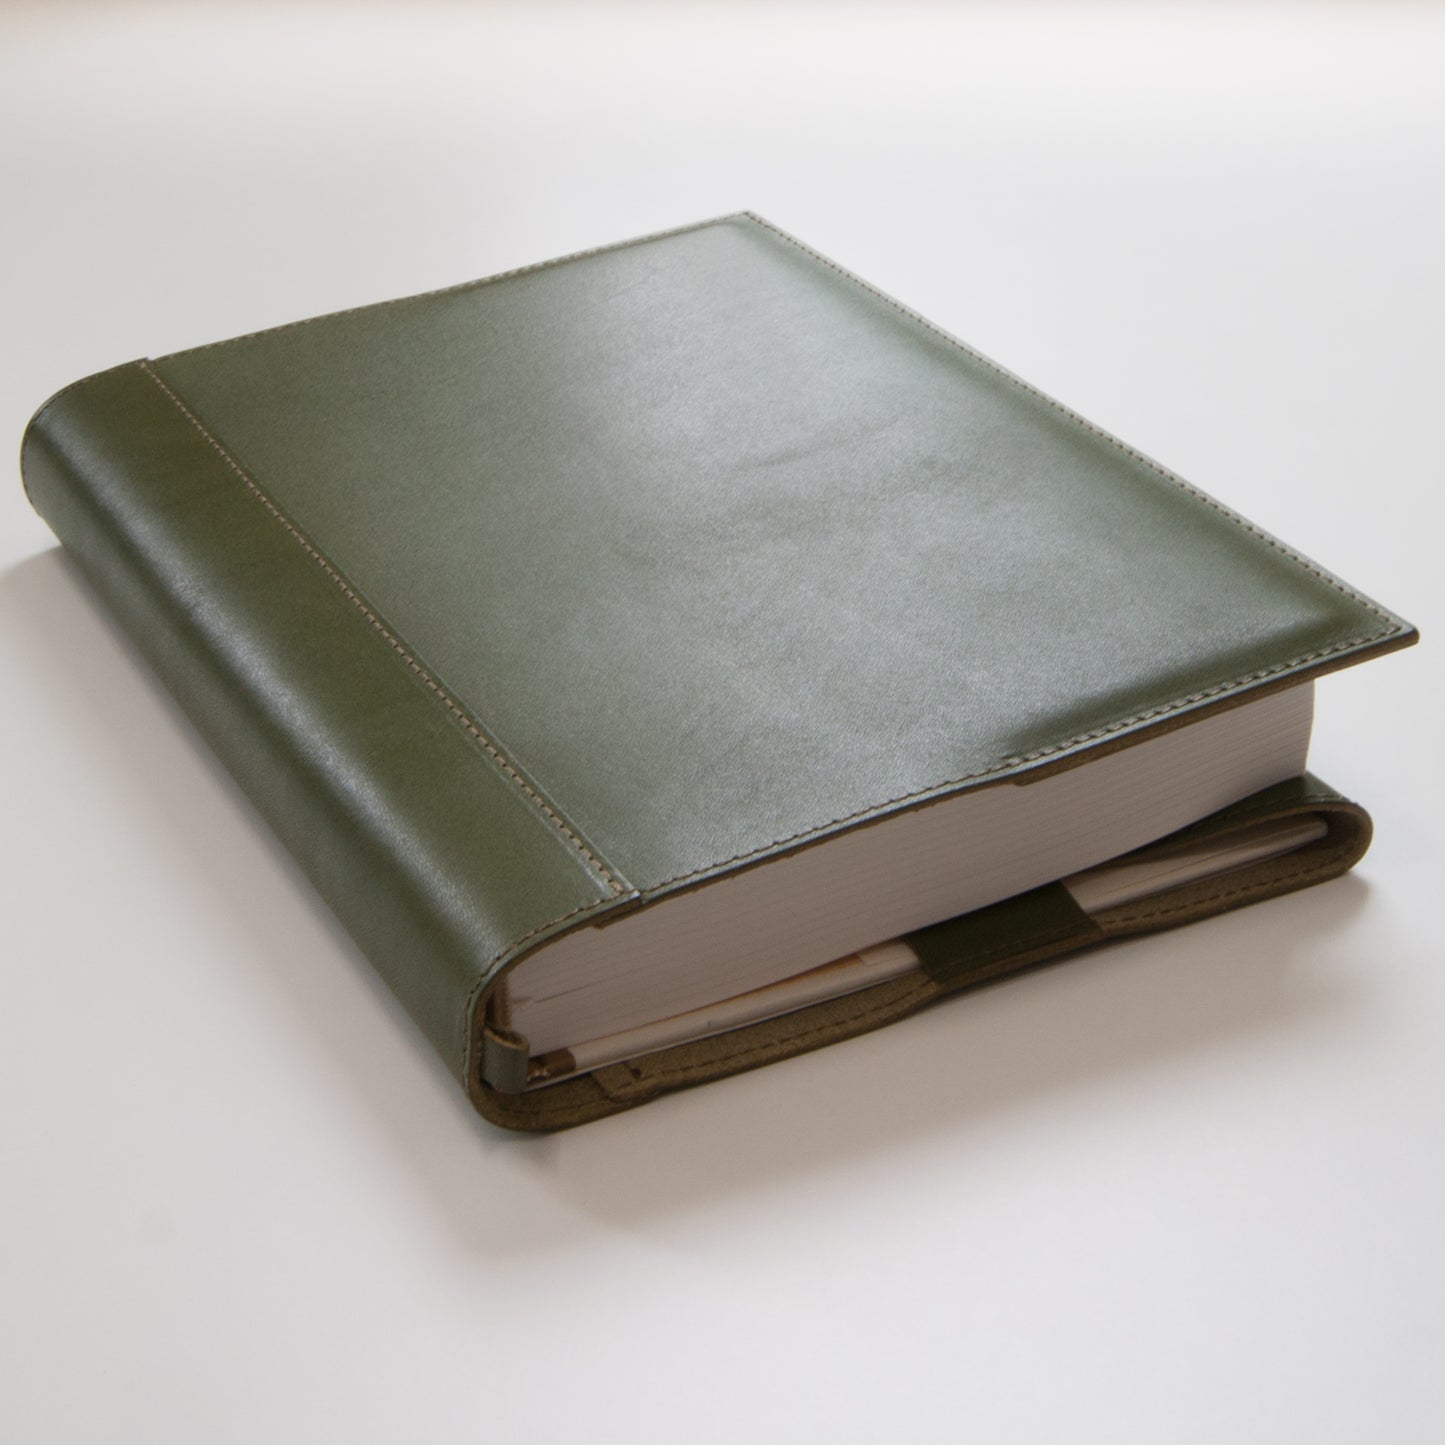 [Japanese Craftsman Made / Classic] Book Cover A5 hard cover Genuine leather bookmark included